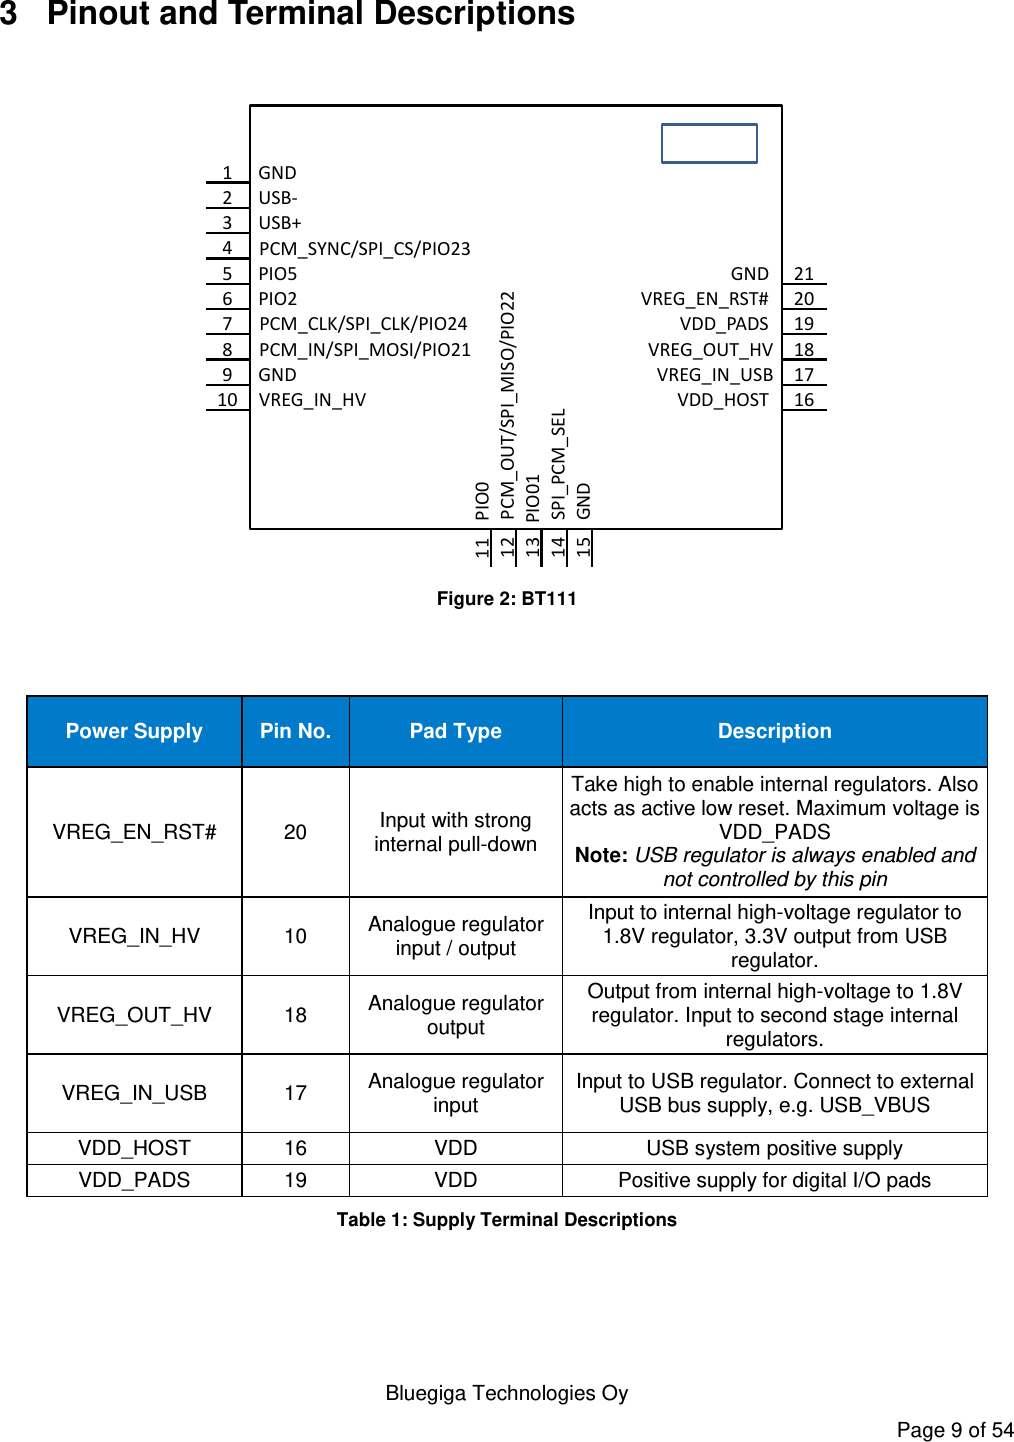    Bluegiga Technologies Oy Page 9 of 54 3  Pinout and Terminal Descriptions  12345678910GND USB-USB+PCM_SYNC/SPI_CS/PIO23PIO5PIO2PCM_CLK/SPI_CLK/PIO24PCM_IN/SPI_MOSI/PIO21GND VREG_IN_HV 1112131415PIO0 PCM_OUT/SPI_MISO/PIO22 PIO01SPI_PCM_SEL GND212019181716VDD_HOST VREG_IN_USBVREG_OUT_HVVDD_PADS VREG_EN_RST# GND  Figure 2: BT111   Power Supply Pin No. Pad Type Description VREG_EN_RST# 20 Input with strong internal pull-down Take high to enable internal regulators. Also acts as active low reset. Maximum voltage is VDD_PADS Note: USB regulator is always enabled and not controlled by this pin VREG_IN_HV 10 Analogue regulator input / output Input to internal high-voltage regulator to 1.8V regulator, 3.3V output from USB regulator. VREG_OUT_HV 18 Analogue regulator output Output from internal high-voltage to 1.8V regulator. Input to second stage internal regulators. VREG_IN_USB 17 Analogue regulator input Input to USB regulator. Connect to external USB bus supply, e.g. USB_VBUS VDD_HOST 16 VDD USB system positive supply VDD_PADS 19 VDD Positive supply for digital I/O pads Table 1: Supply Terminal Descriptions  